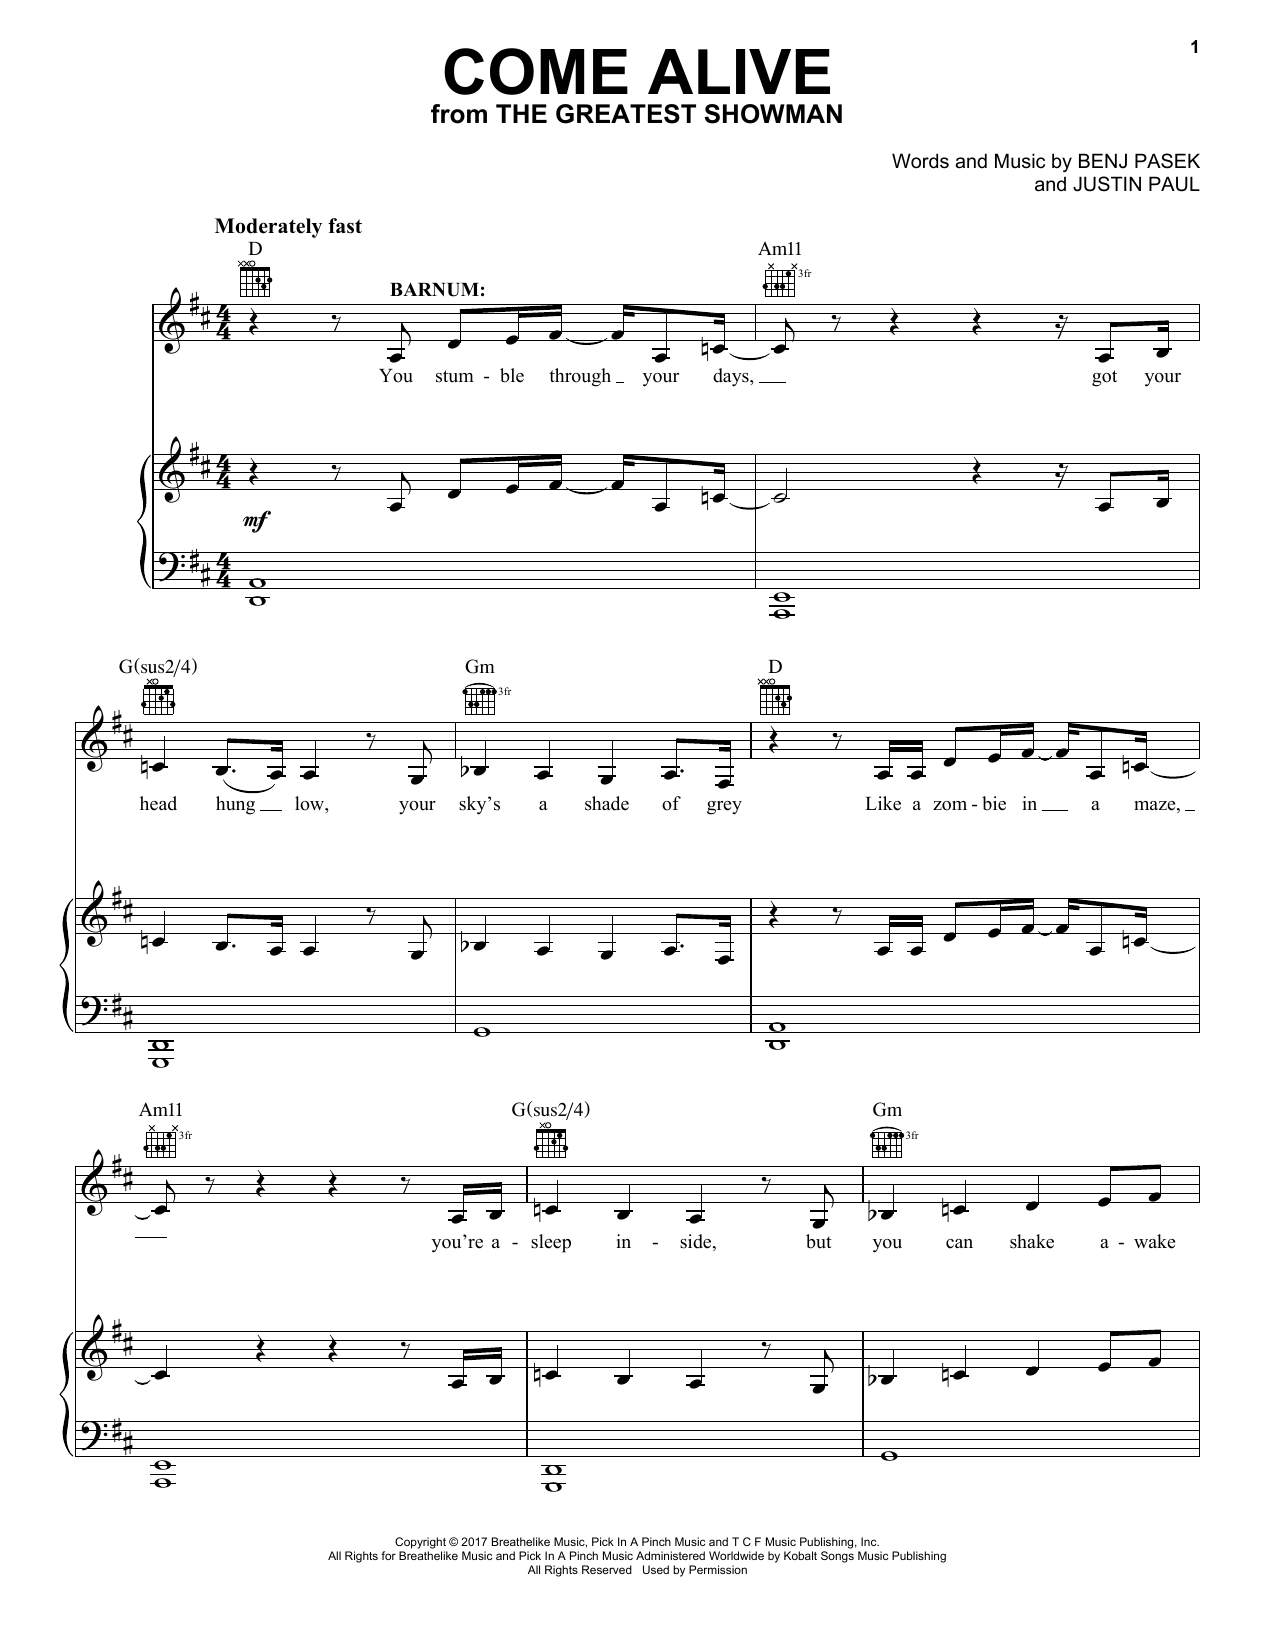 Pasek & Paul Come Alive (from The Greatest Showman) sheet music notes printable PDF score